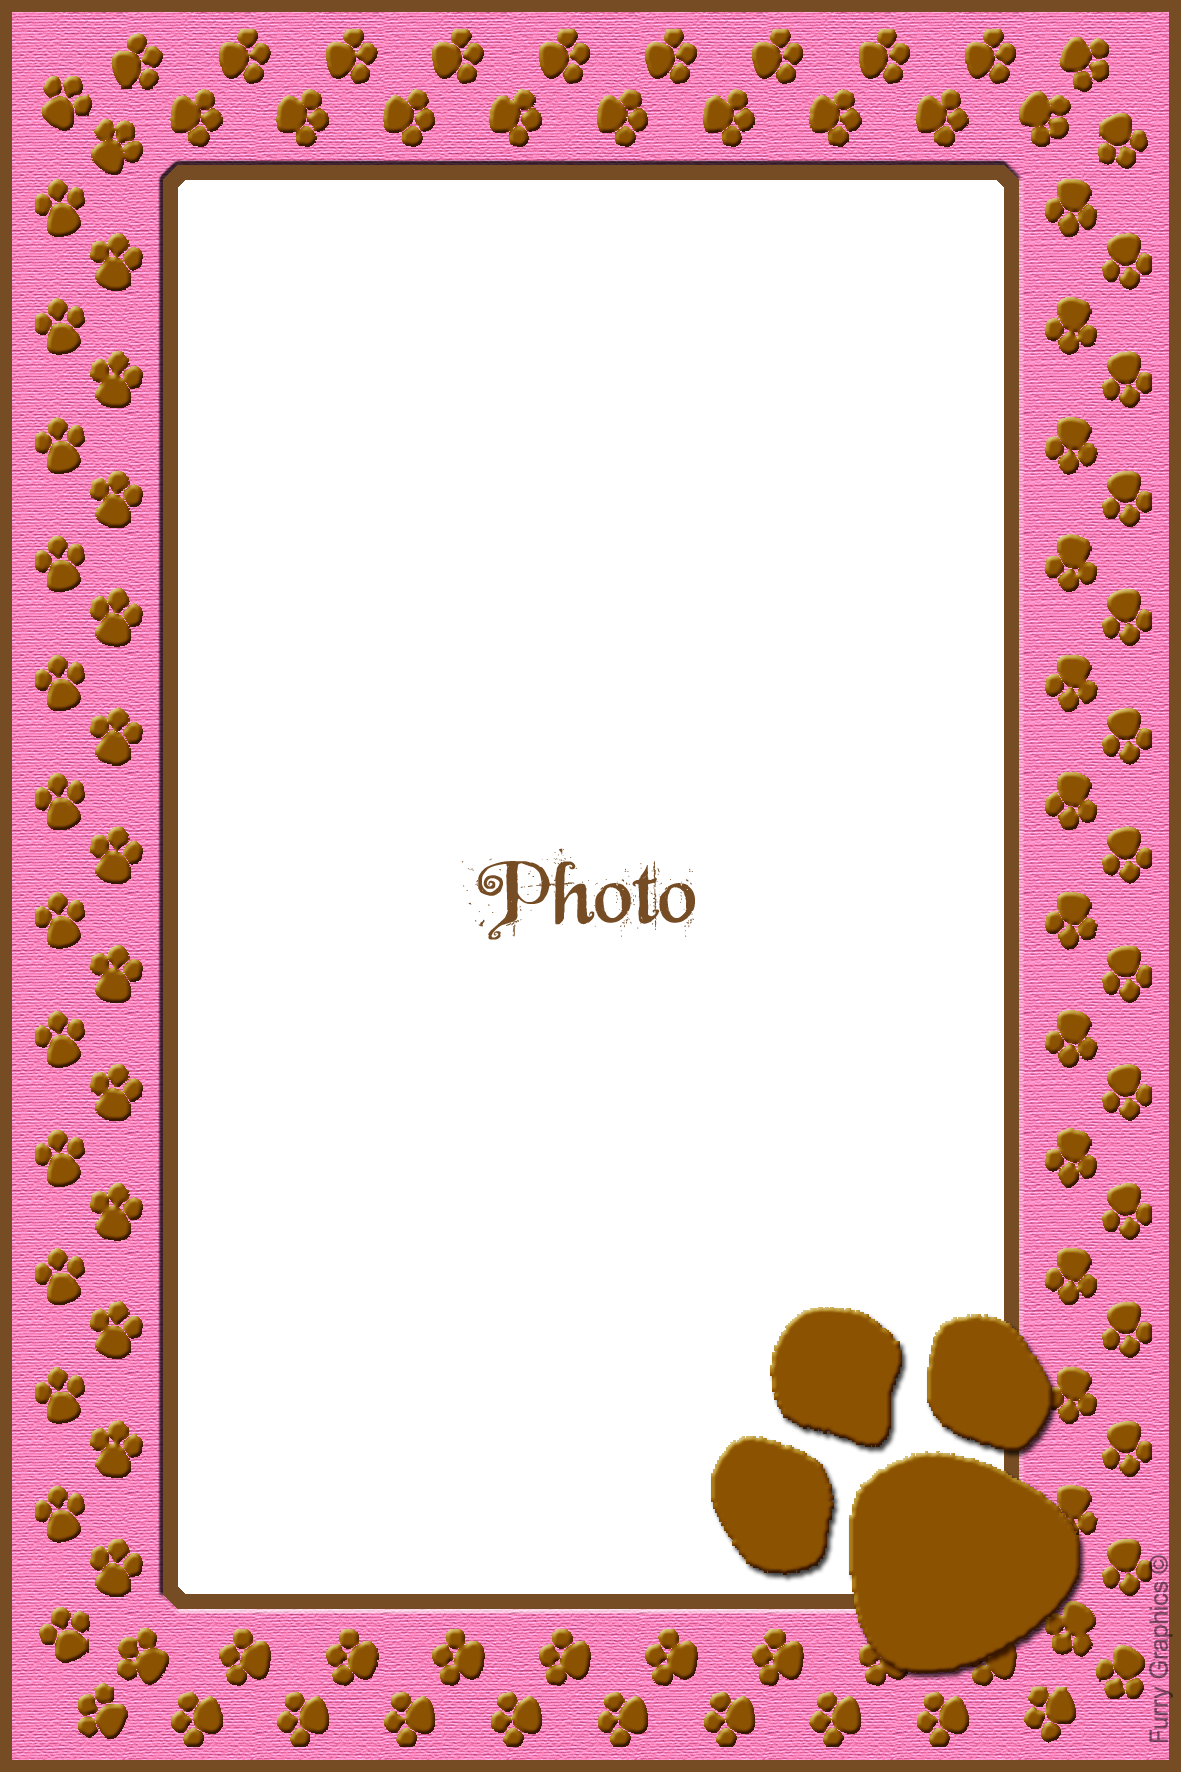 Download Kitten Digital Frames With Cat Paw Borders In Bold Kittens Border Png Png Image With 